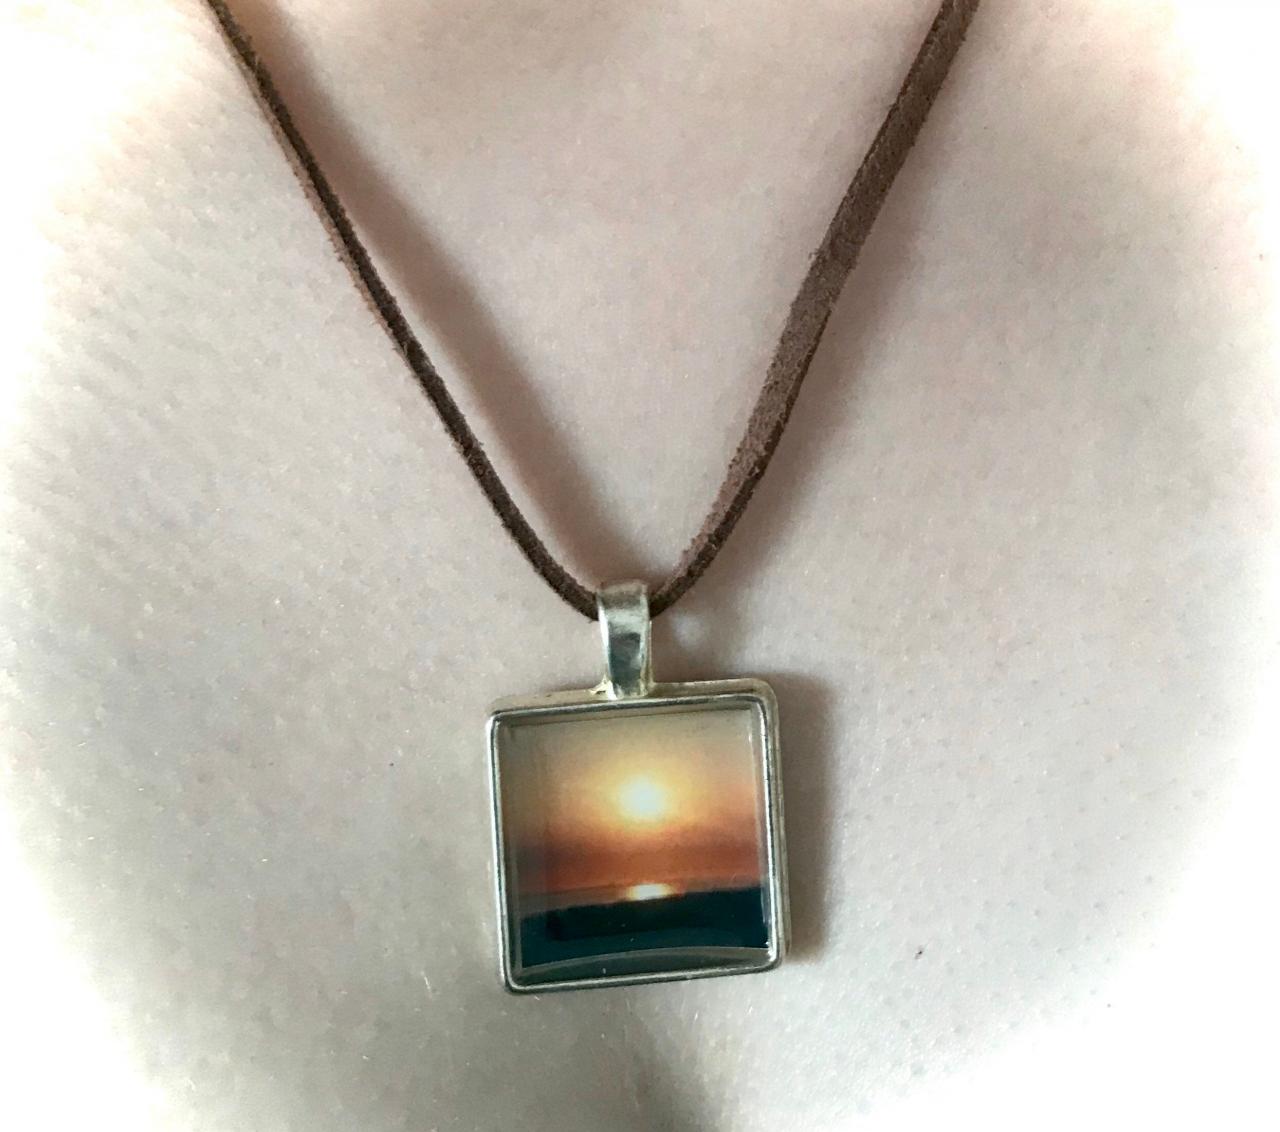 Memories of a vibrant sunset in Croyde - a Memory Necklace